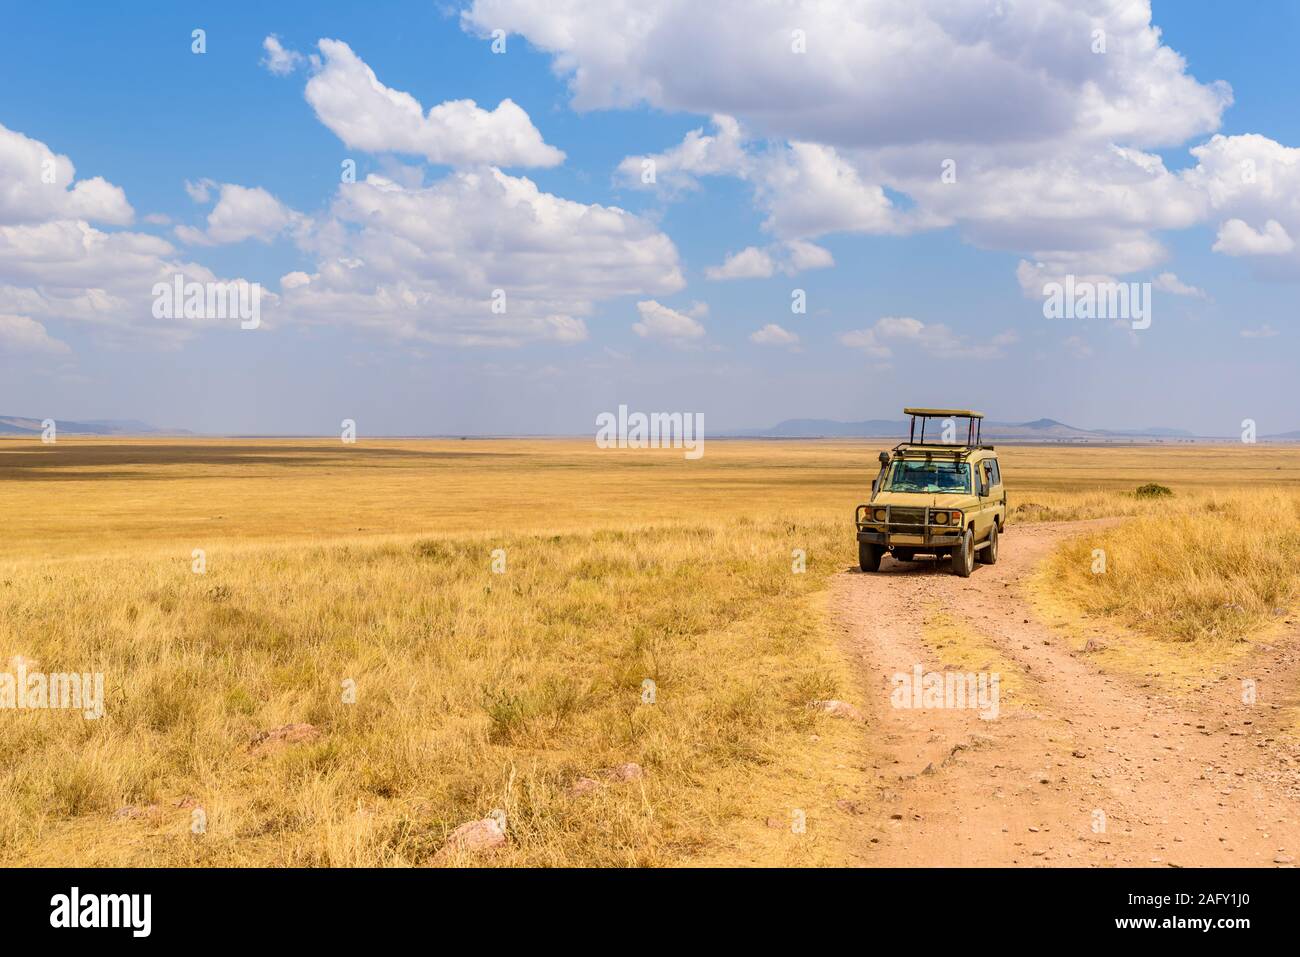 Safari tourists on game drive with Jeep car in Serengeti National Park in beautiful landscape scenery, Tanzania, Africa Stock Photo